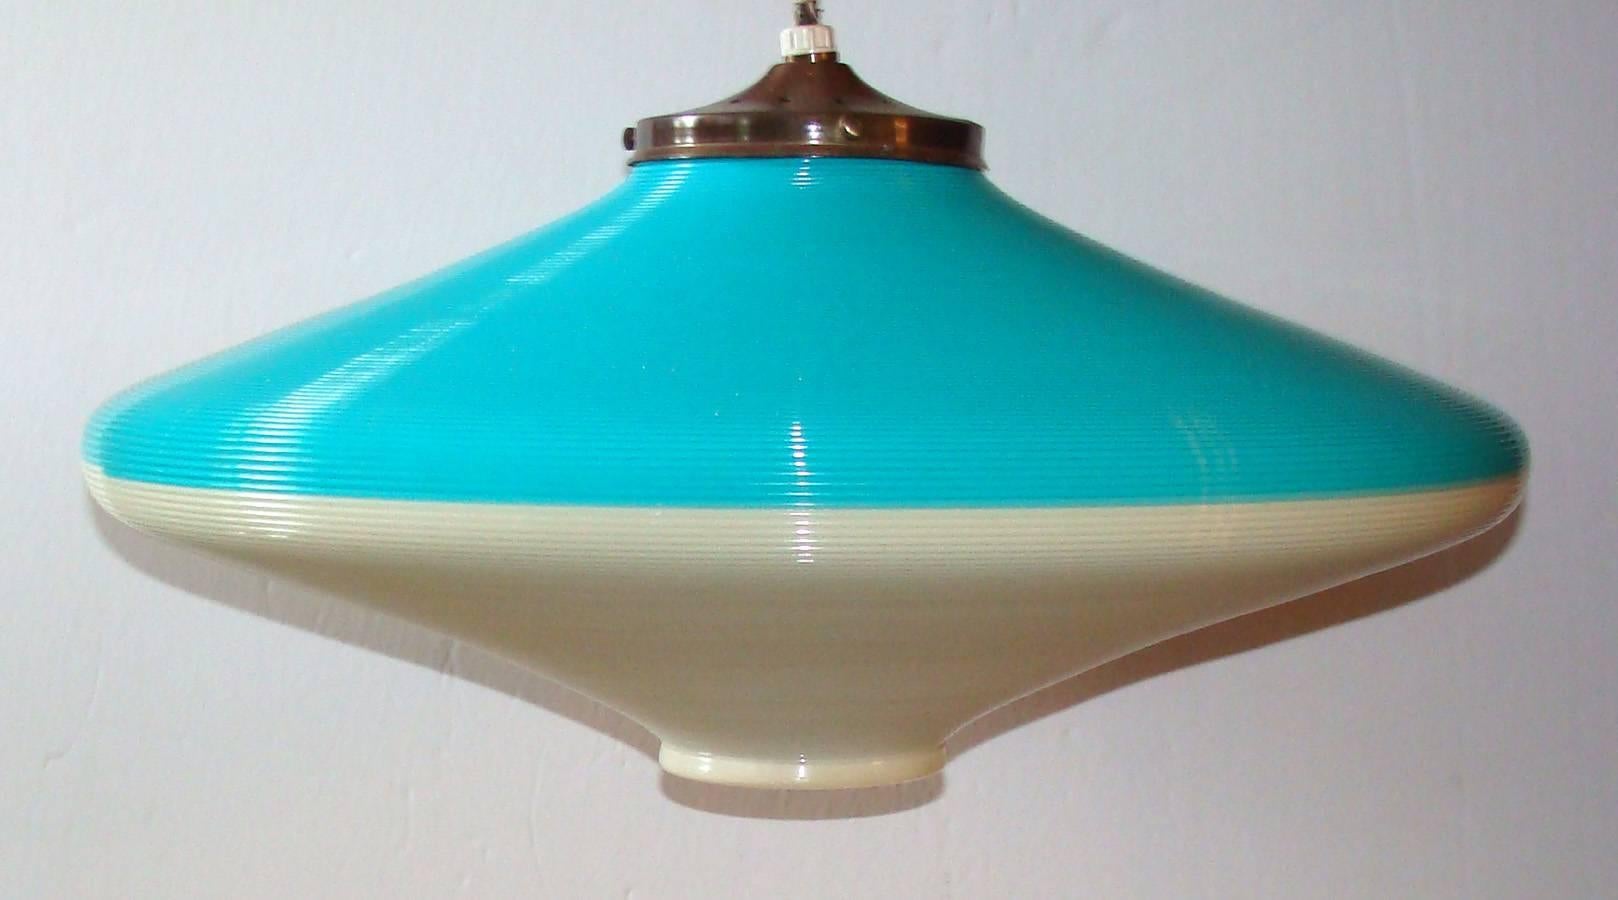 Large 19-inch  Rotaflex hanging fixture in a vibrant two-tone Turquoise and warm white.  Fine original condition including original brass cap.
No chips or cracks.  Needs simple cord replacement.

Initially developed in Europe early 1950's by ARP